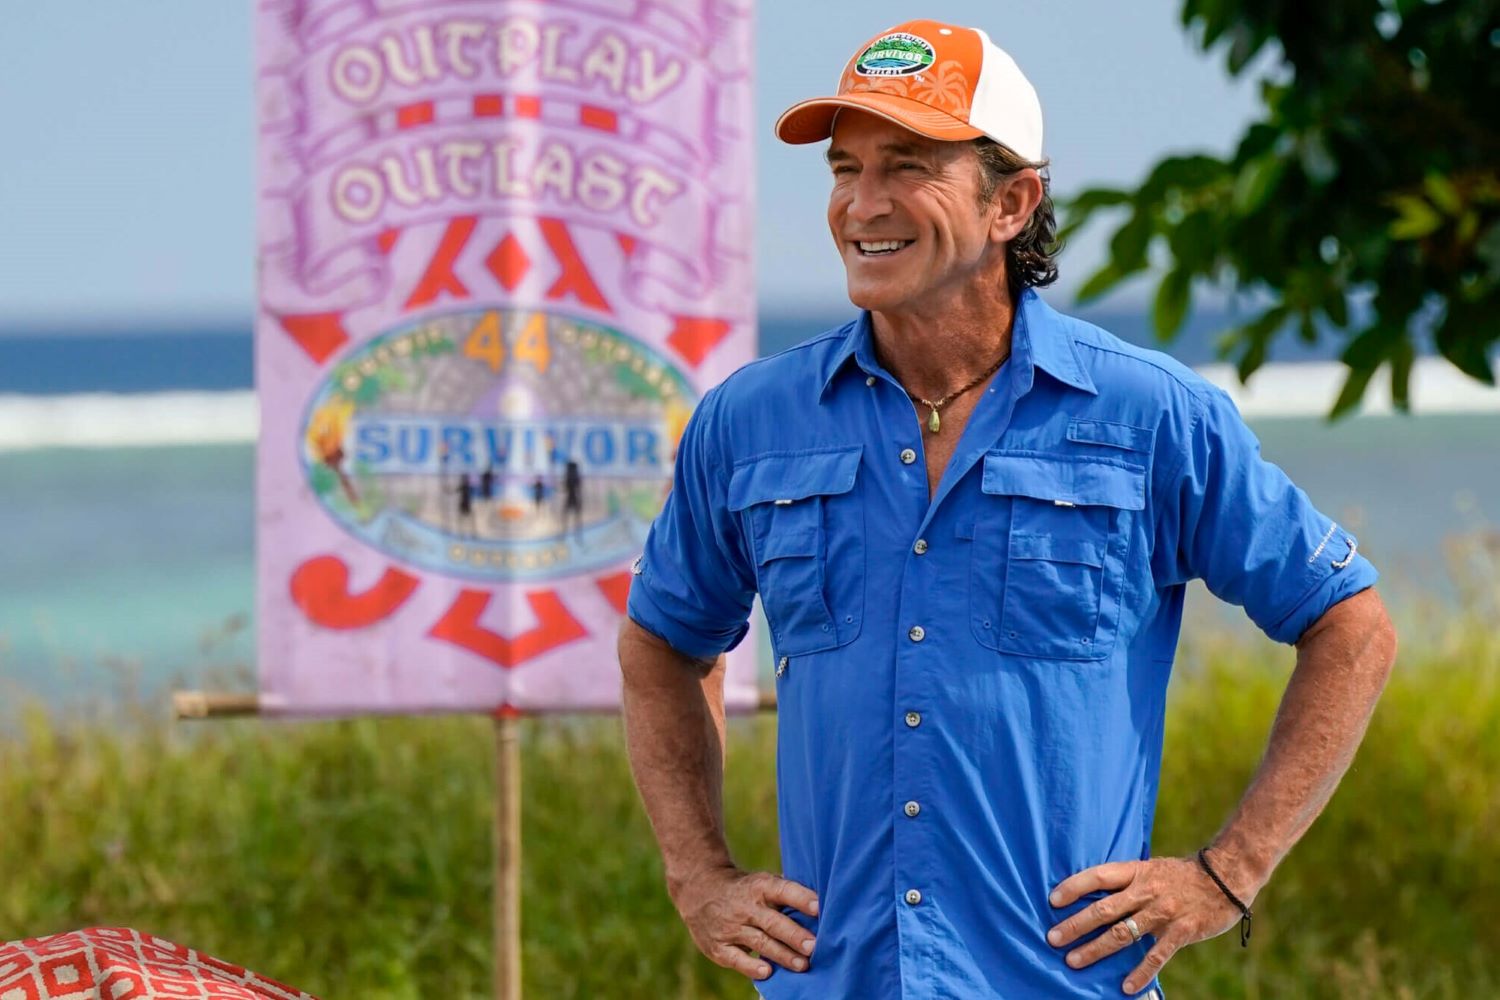 Jeff Probst, who has hosted every season of the CBS show 'Survivor,' wears a bright blue safari short and an orange and white 'Survivor' baseball cap.